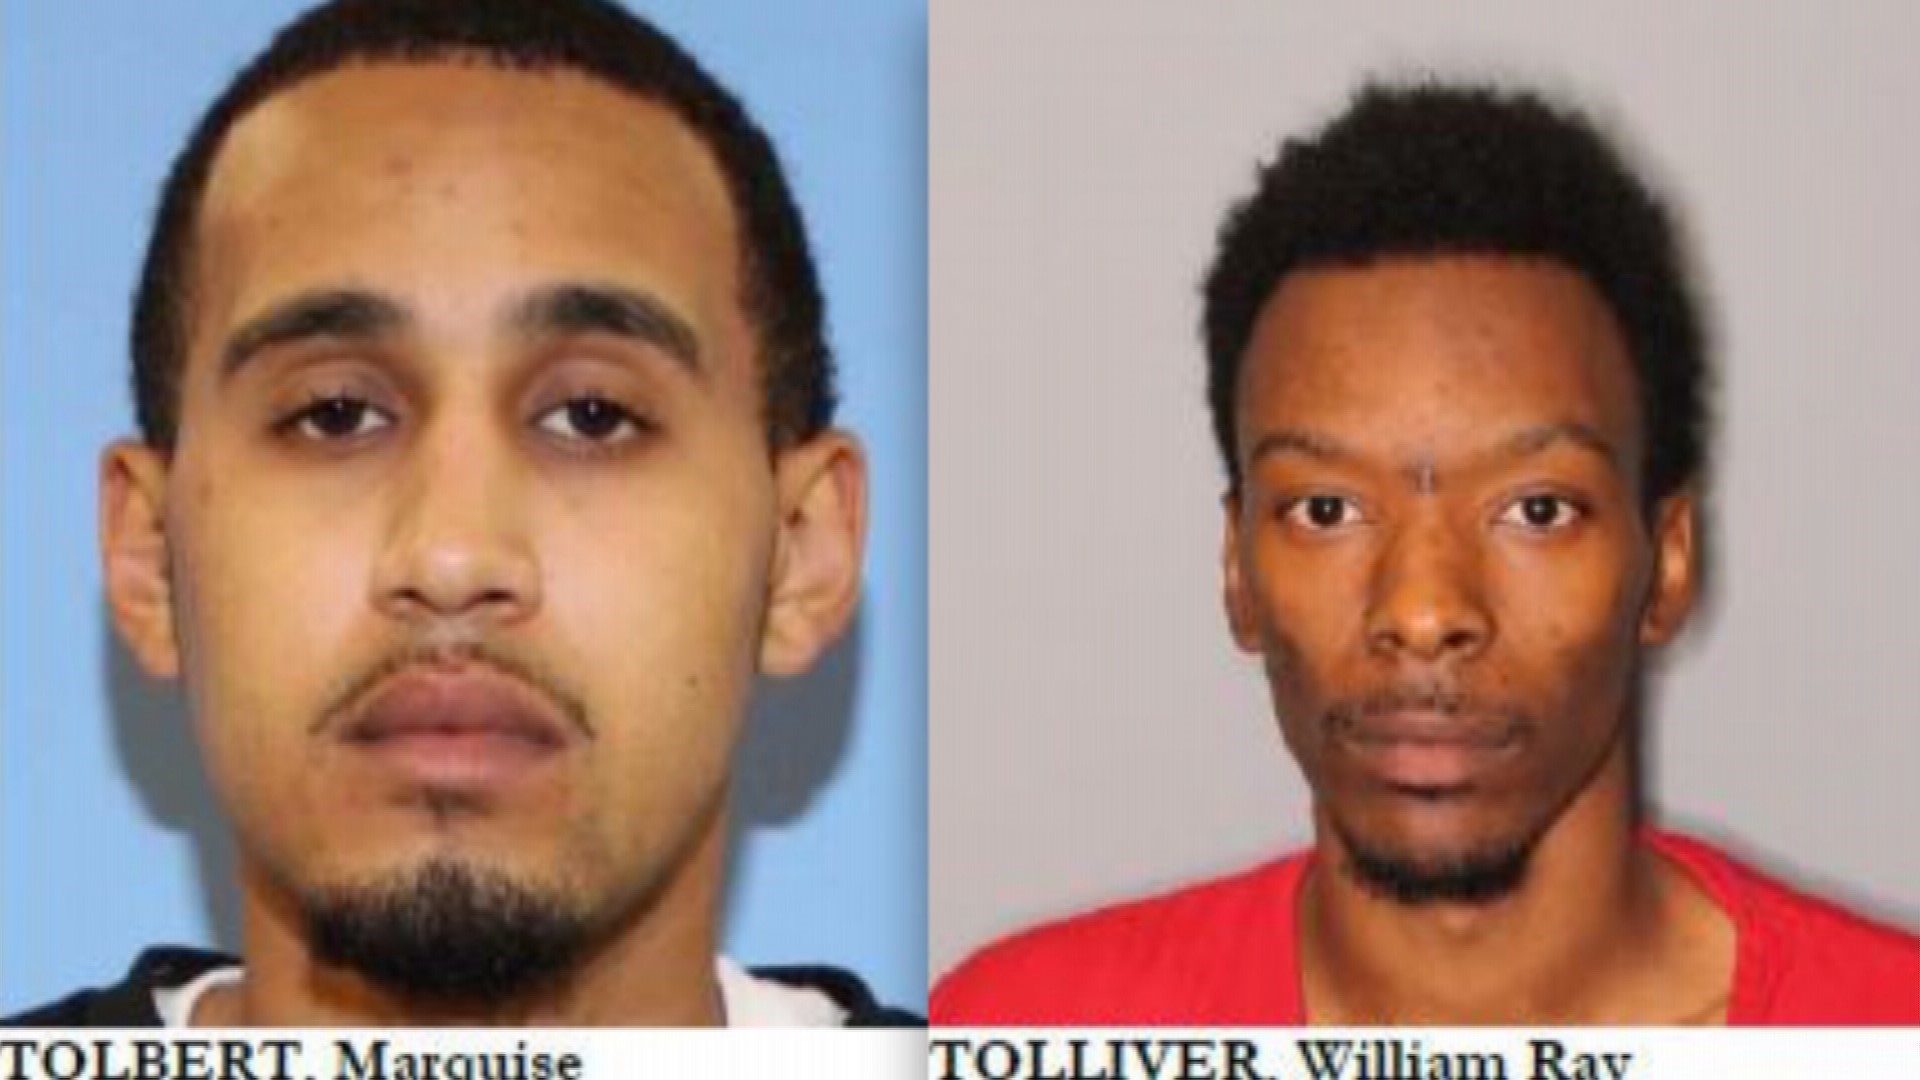 Seattle PD has identified the 24 year old suspects as Marquise Tolbert and William Ray Tolliver.